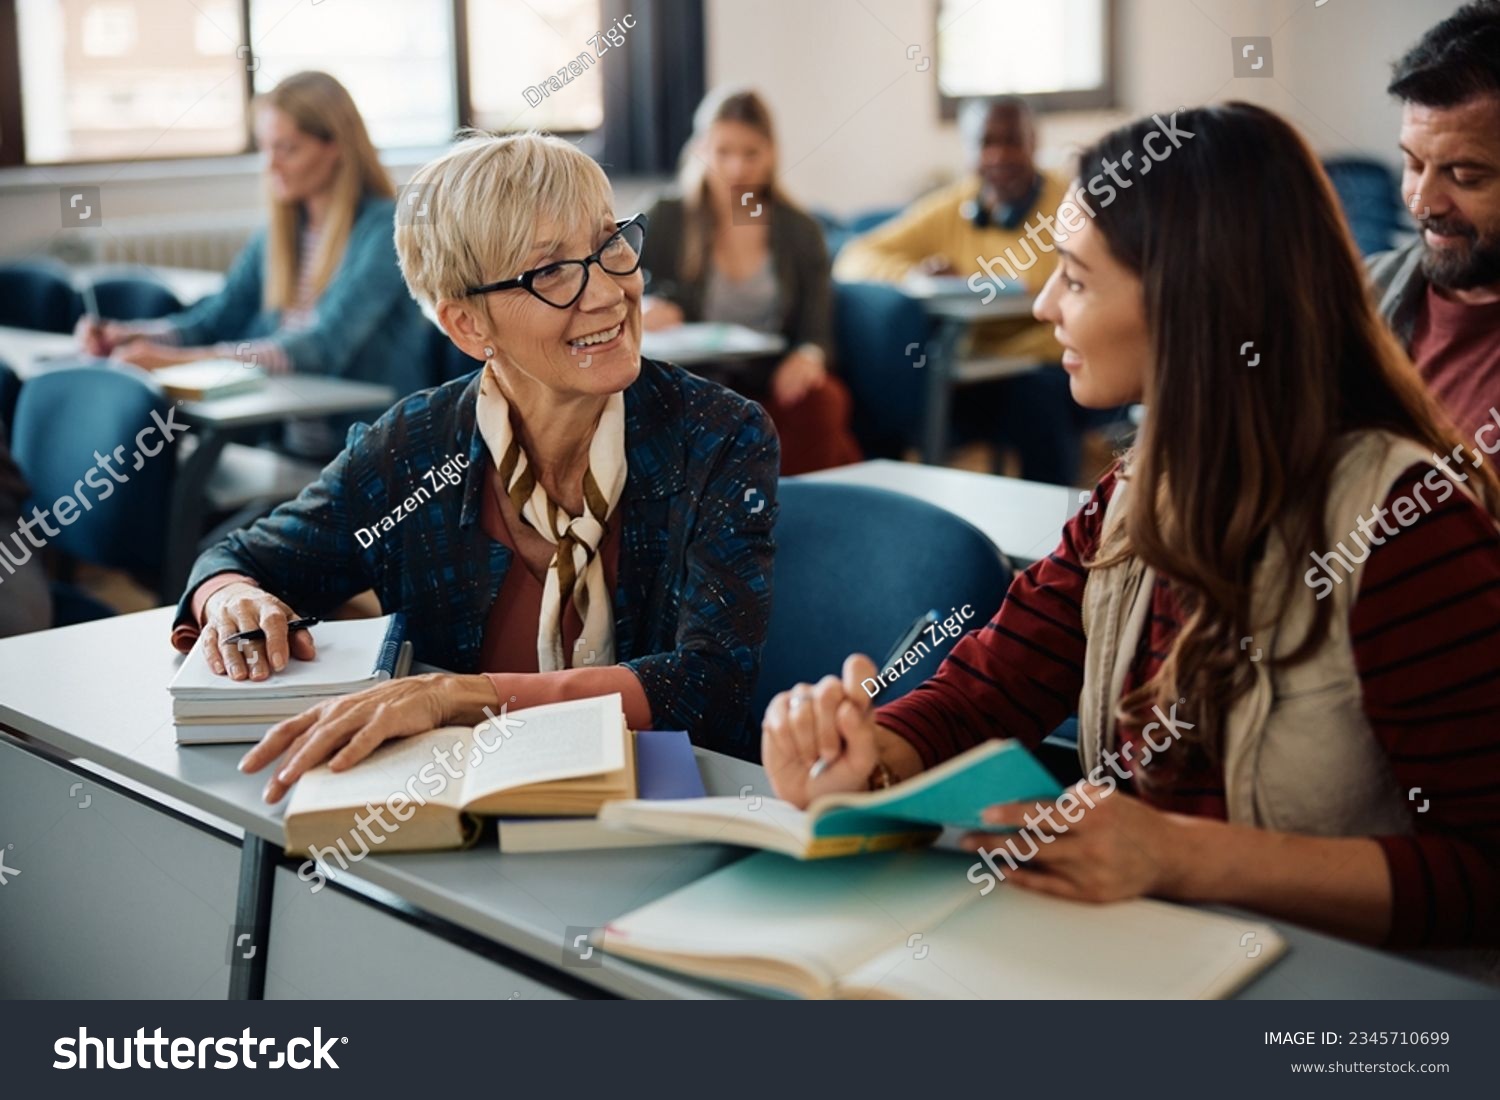 Smiling female adult learners communicating during a class in lecture hall. Focus is on mature woman.  #2345710699